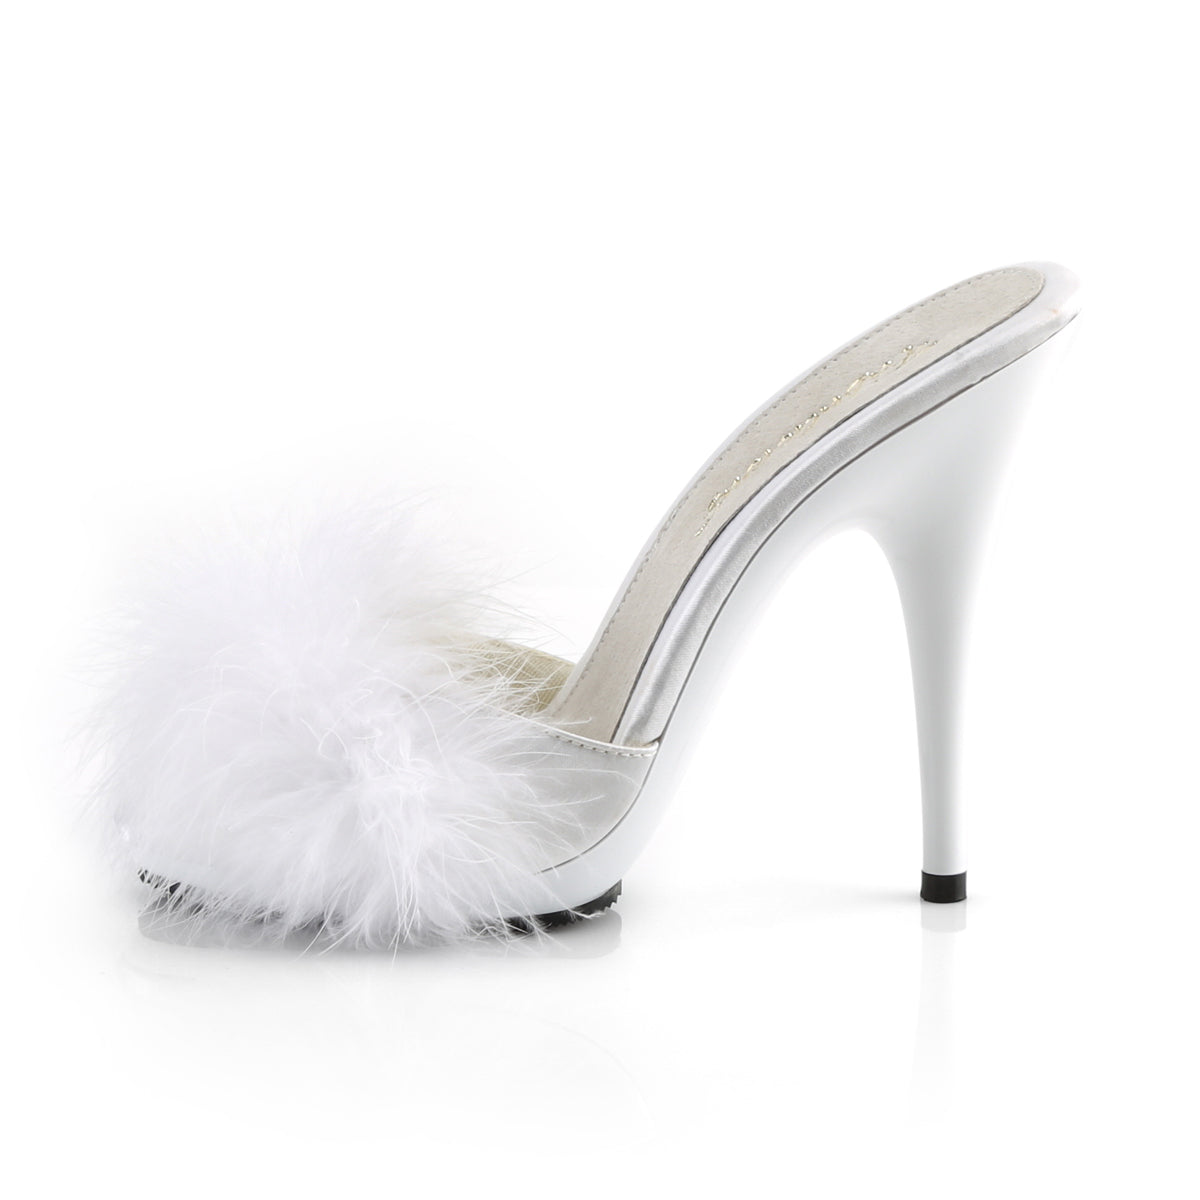 POISE-501F Fabulicious 5 Inch Heel White Satin Fur Sexy Shoe-Fabulicious- Sexy Shoes Pole Dance Heels